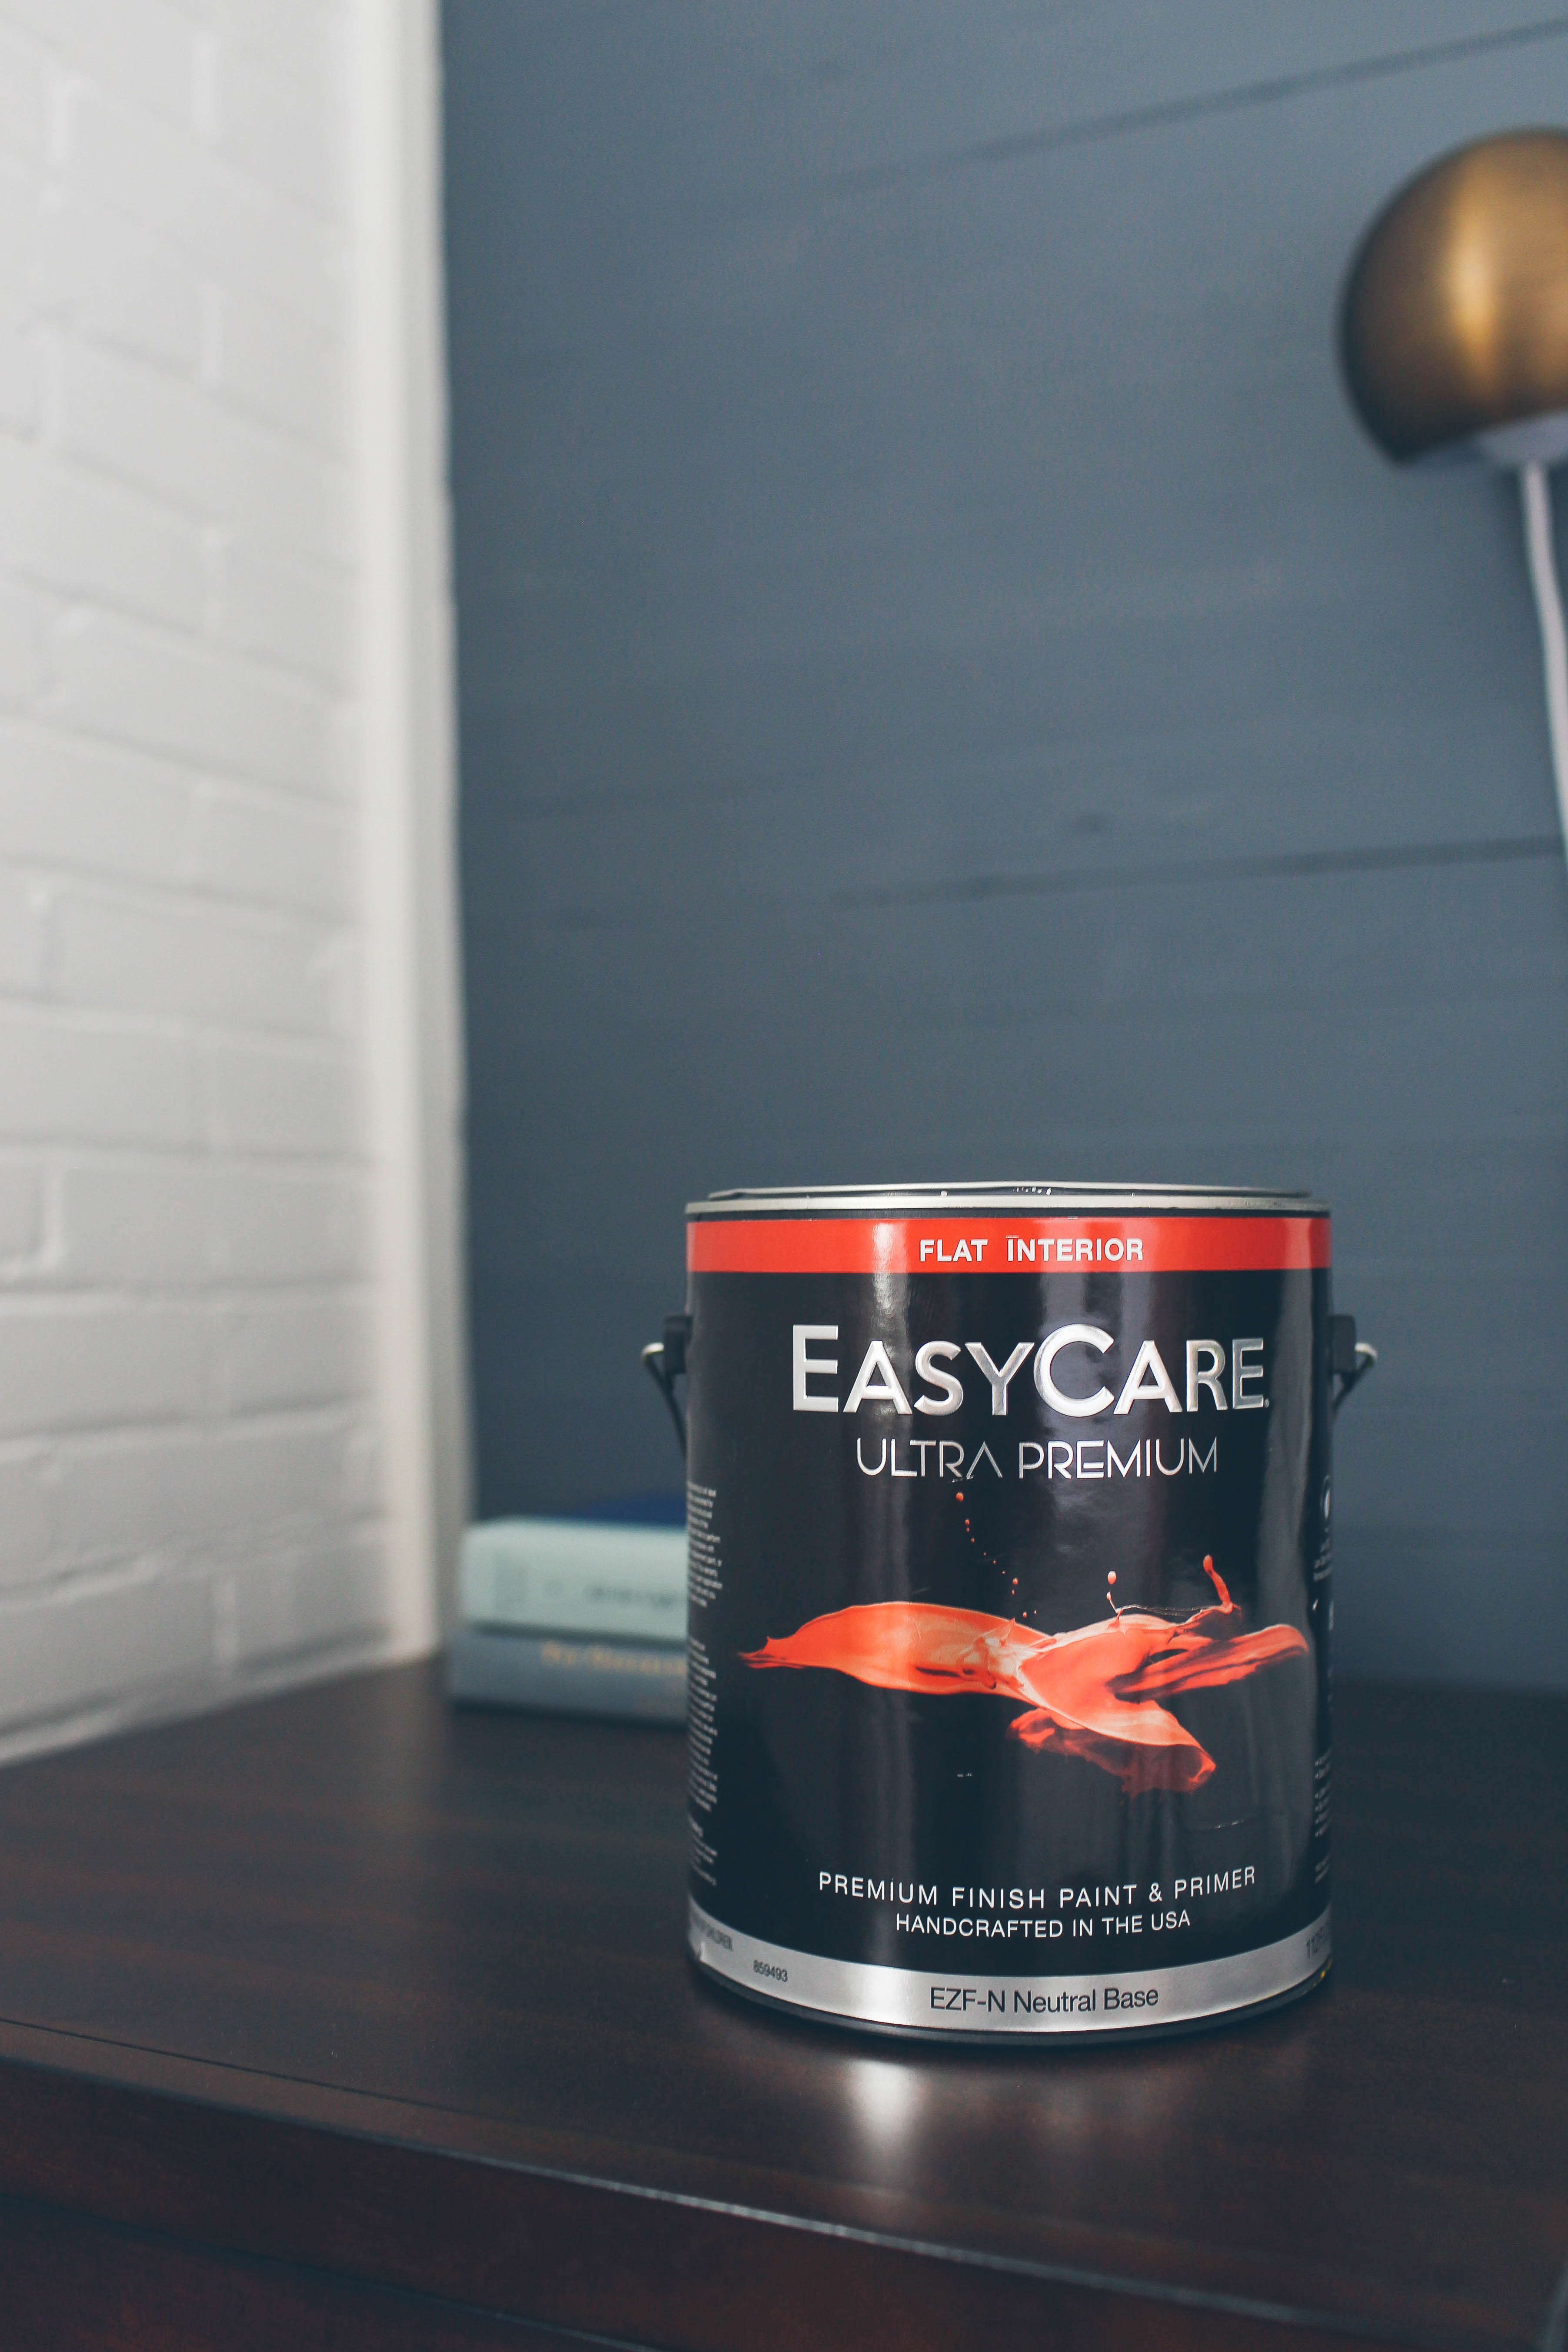 easy care paint